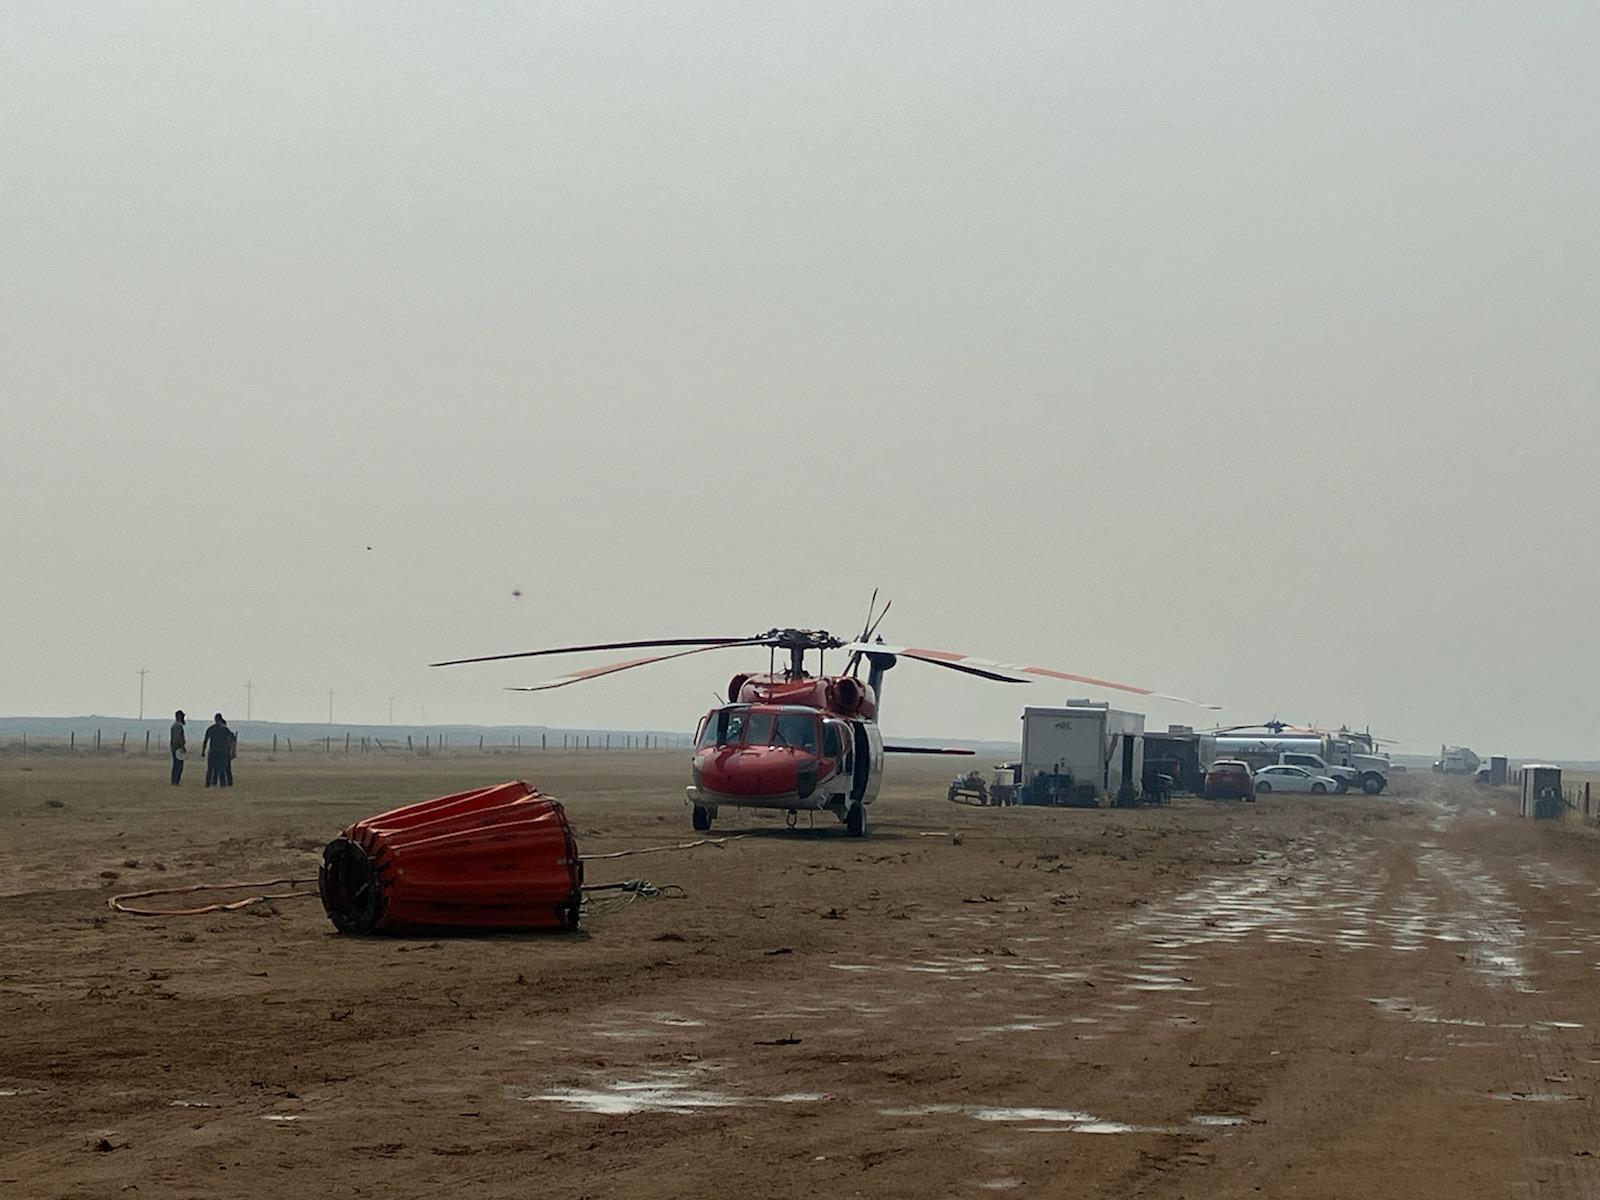 Helicopter on ground at helicopter base